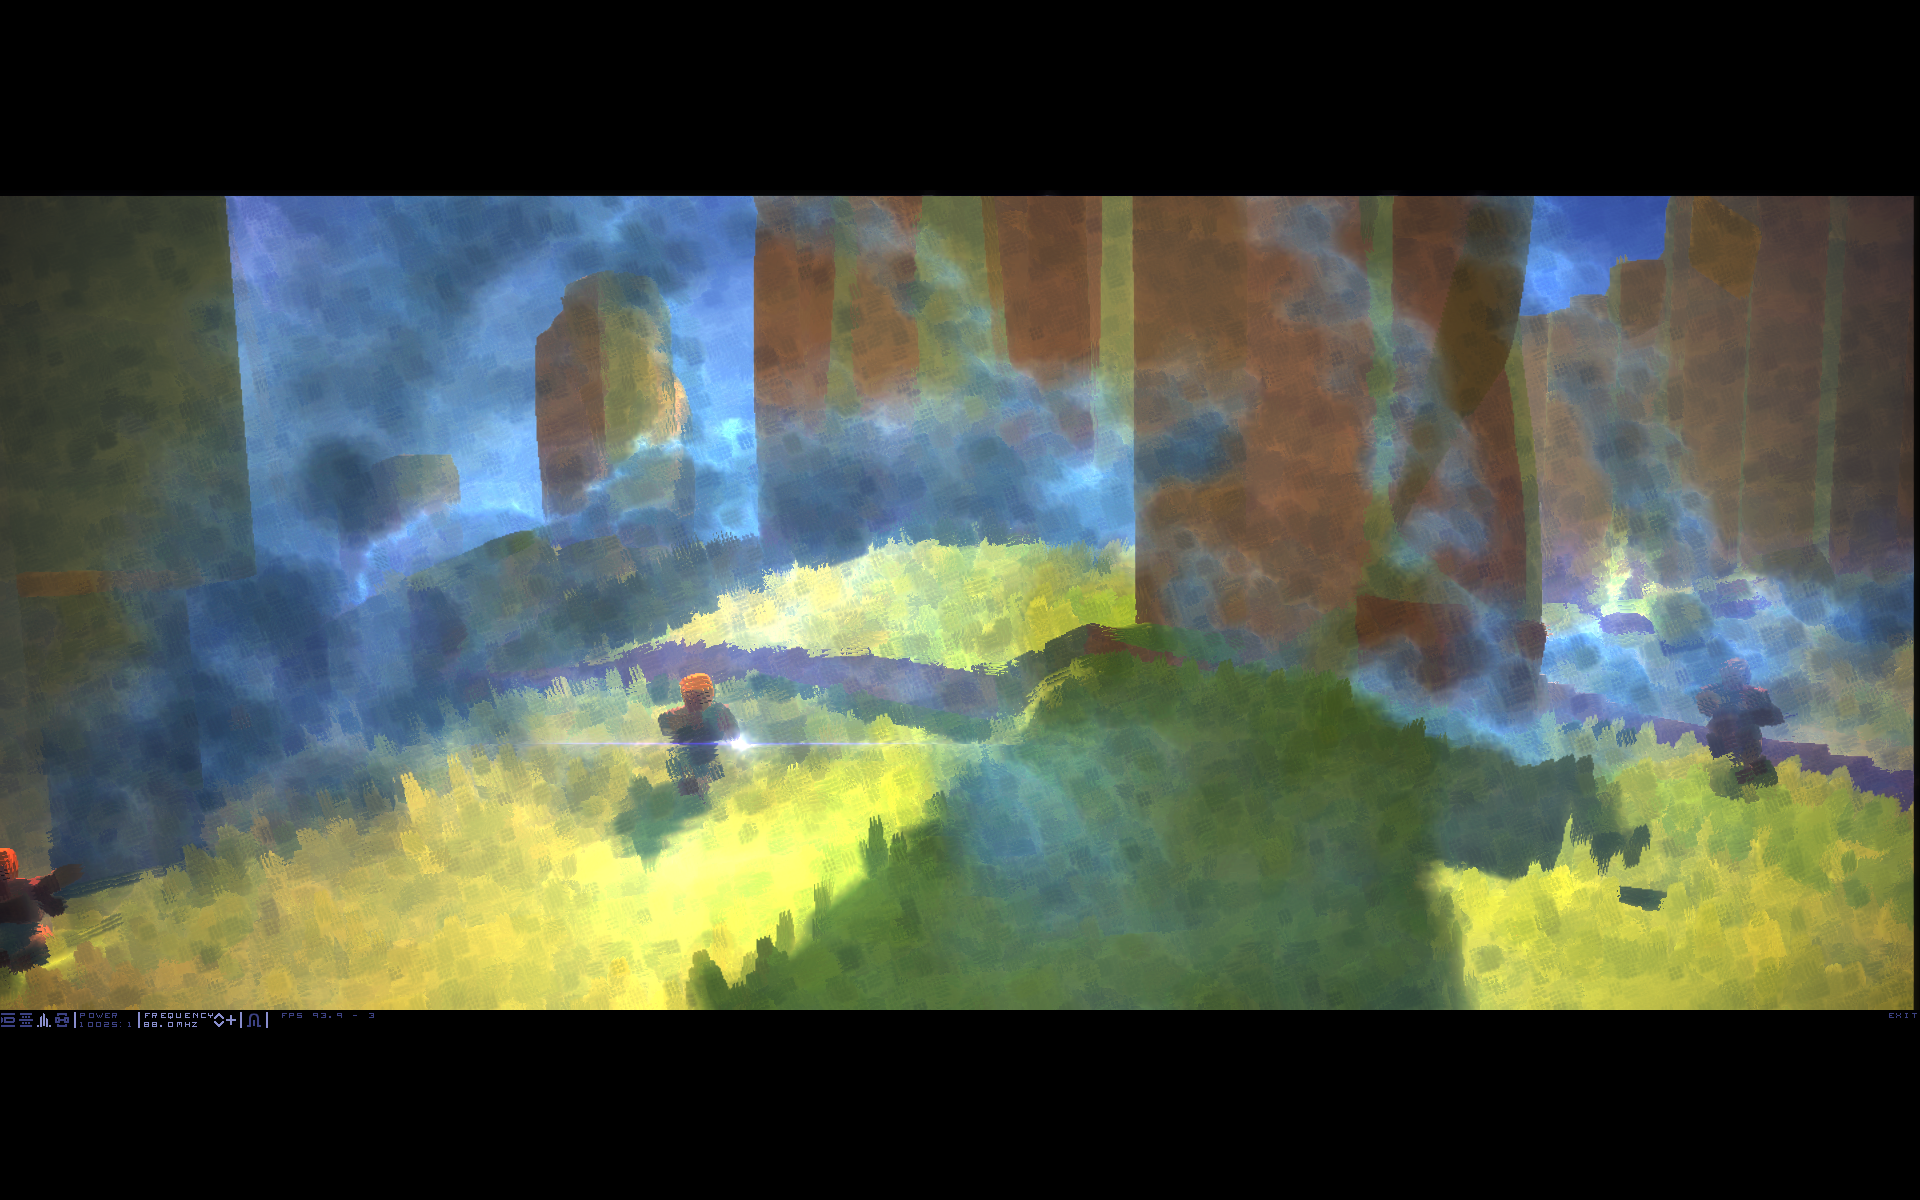 A screenshot from the game Love.  This is an outdoor scene showing grass, rock outcroppings, some players, and the games impressionist art style.